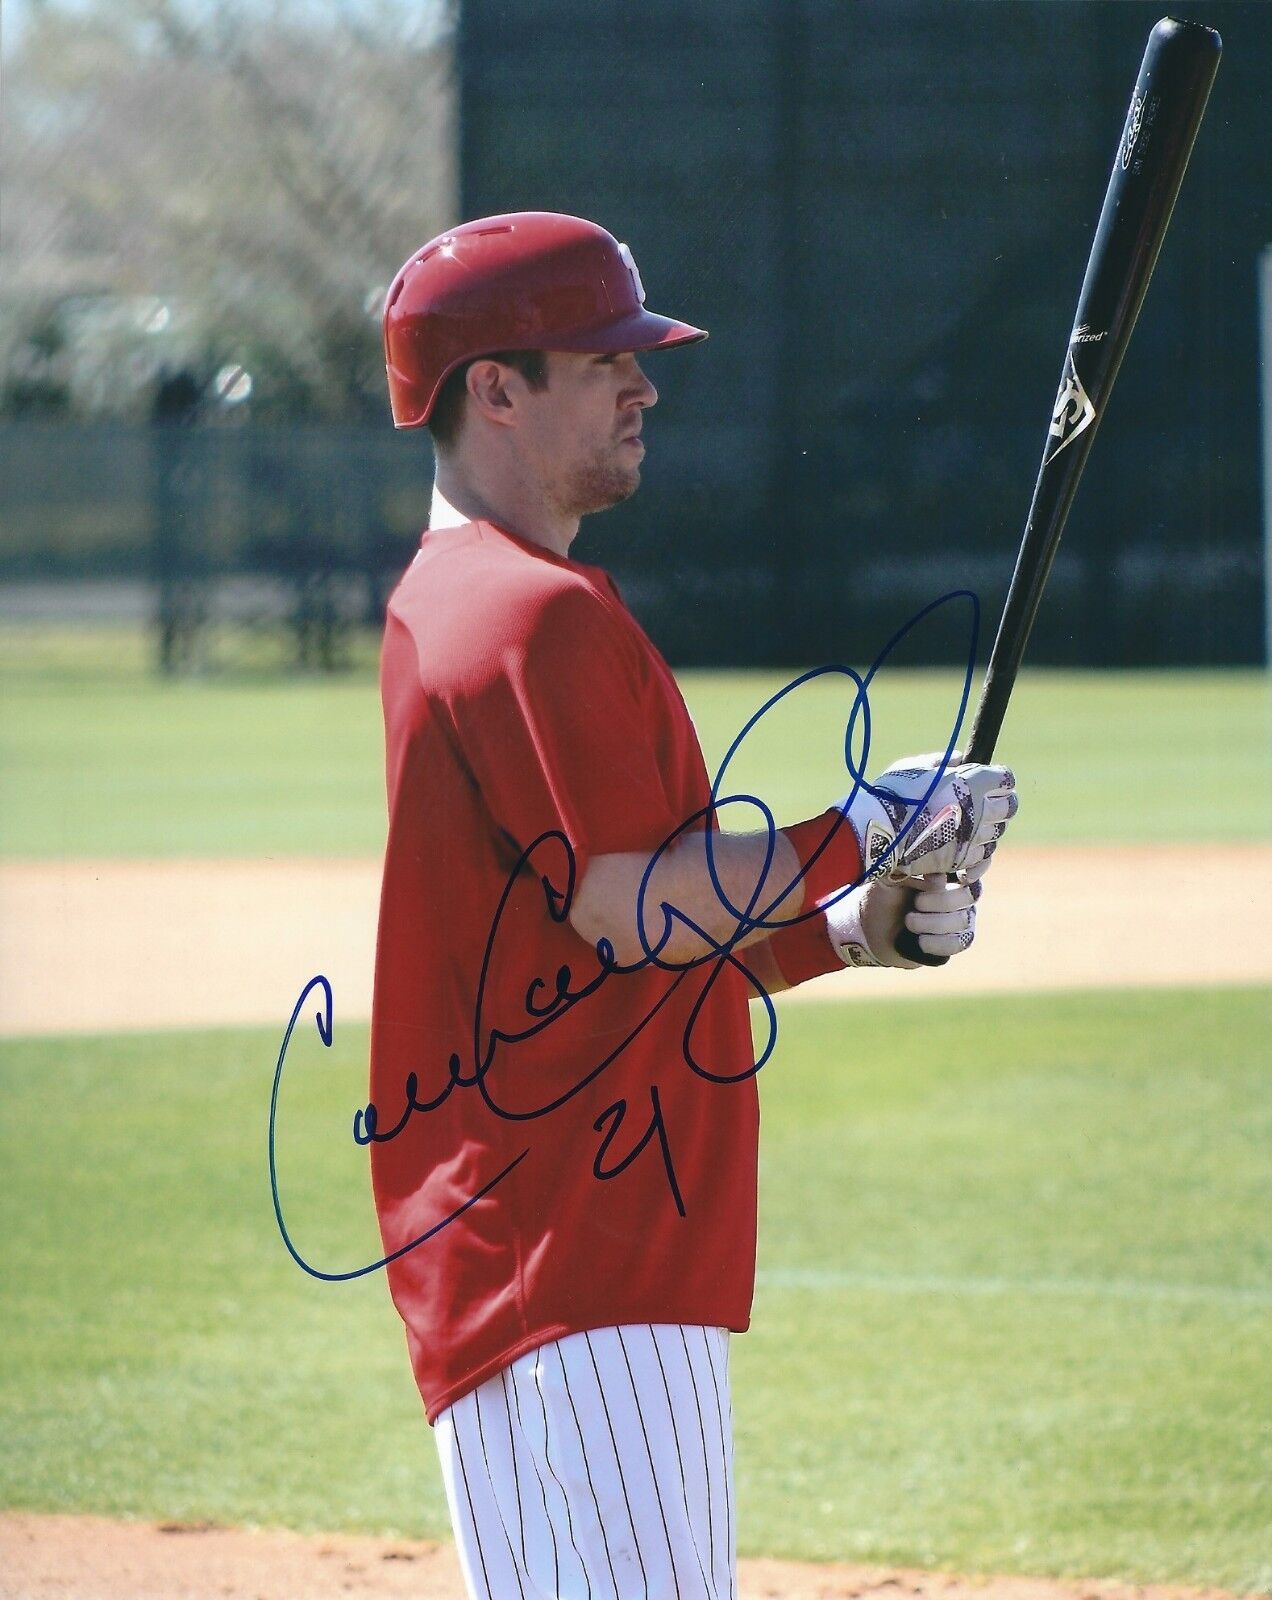 Signed 8x10 COLLIN COWGILL Philadelphia Phillies Autographed Photo Poster painting - COA